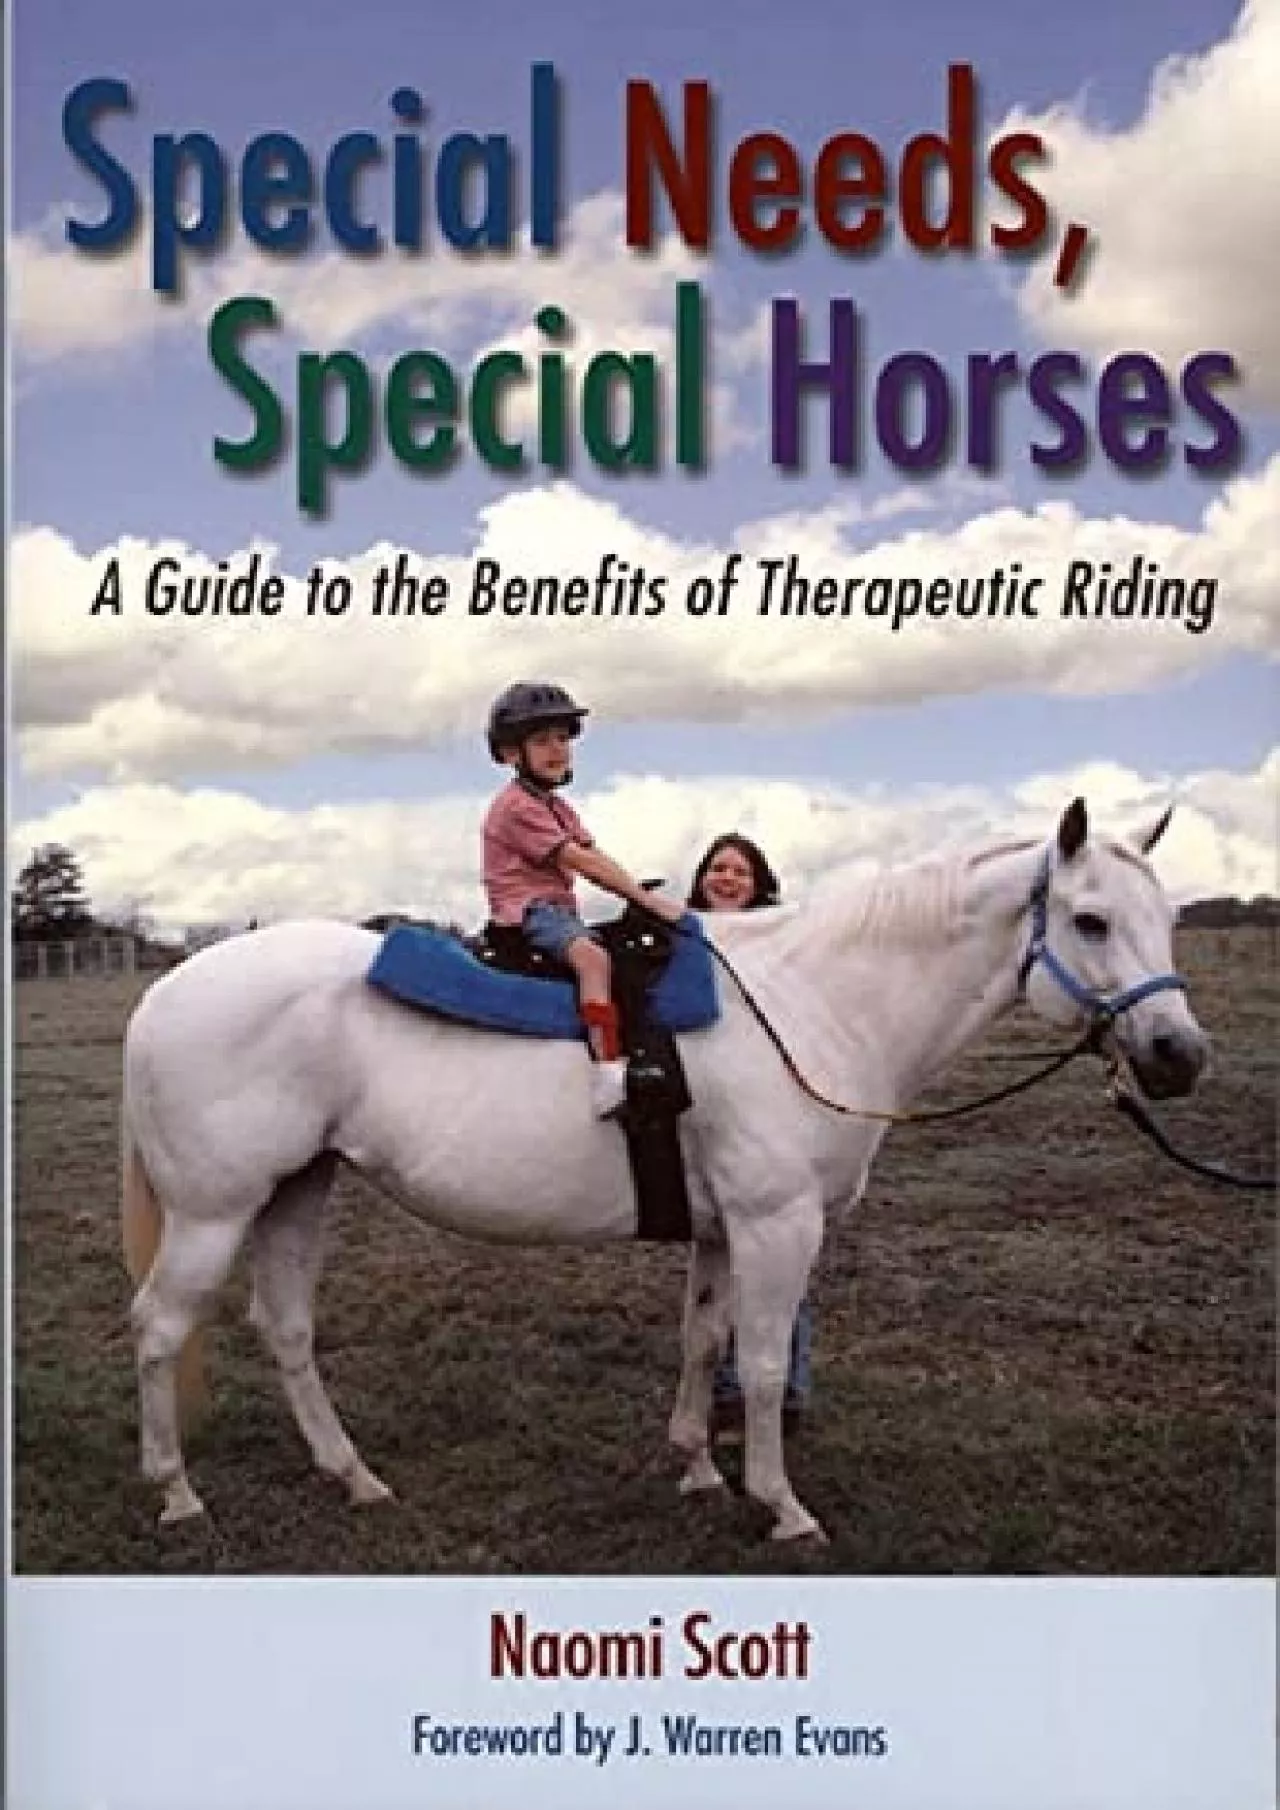 (EBOOK)-Special Needs, Special Horses: A Guide to the Benefits of Therapeutic Riding (Practical